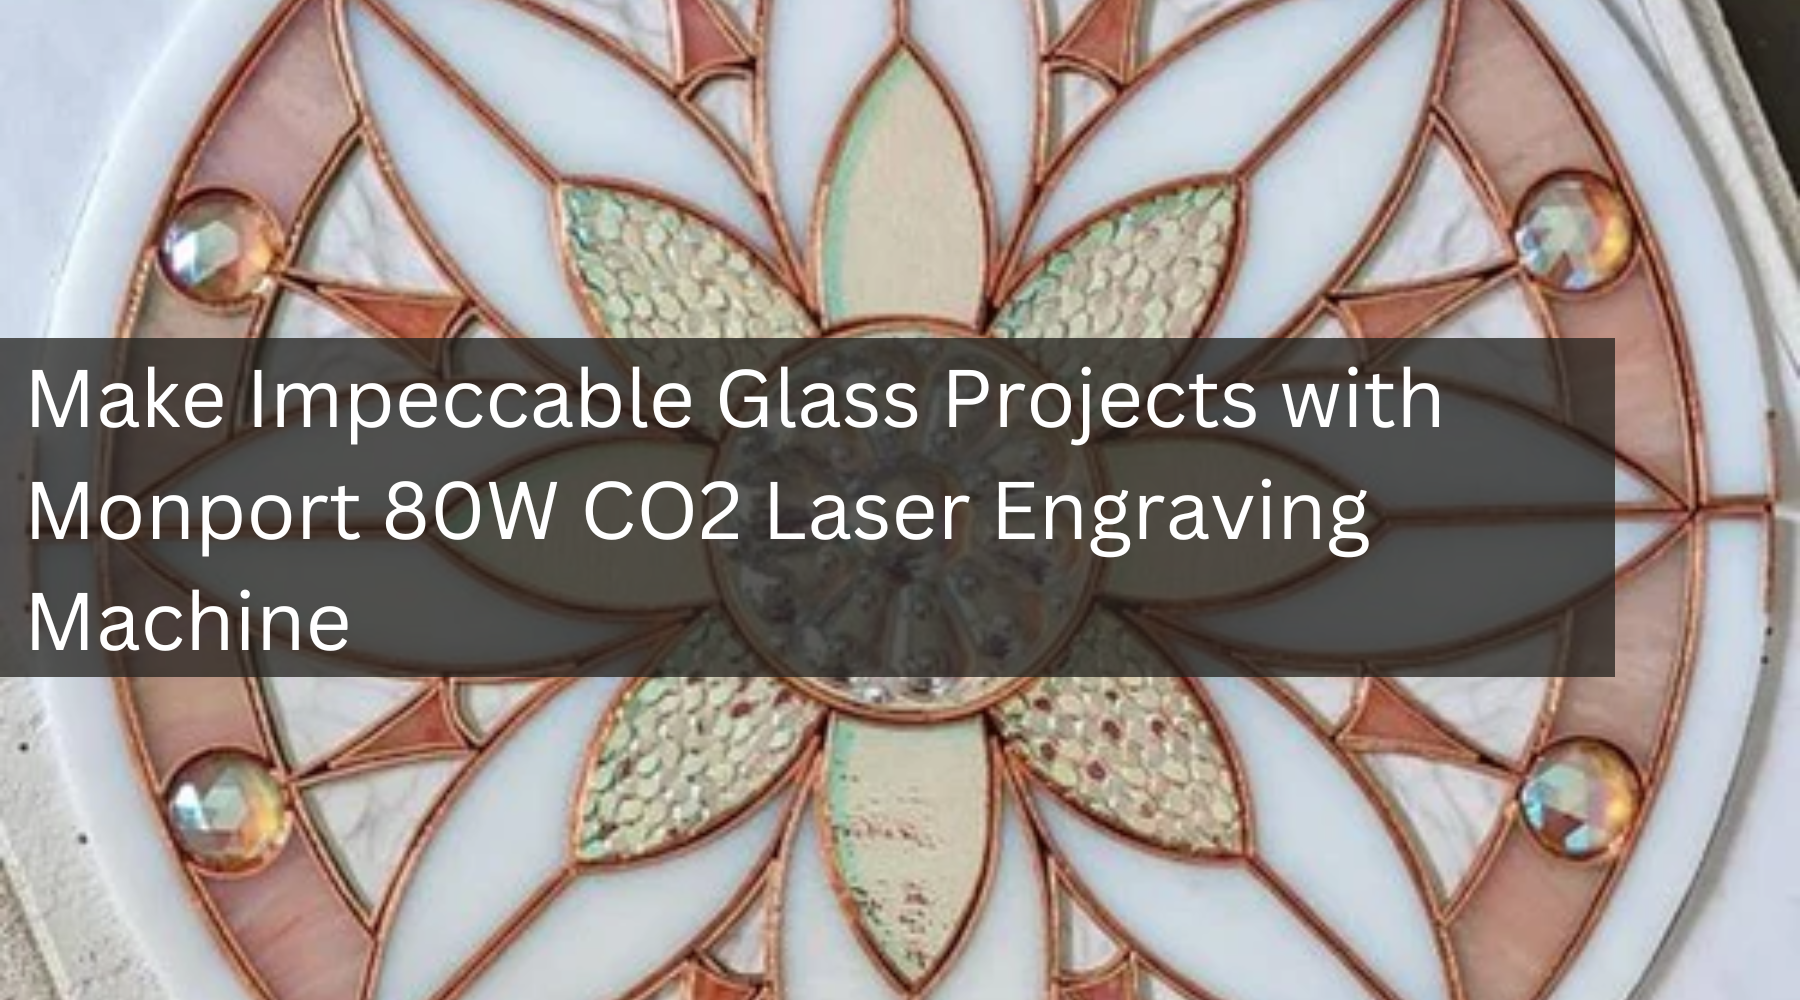 Make Impeccable Glass Projects with Monport 80W CO2 Laser Engraving Machine